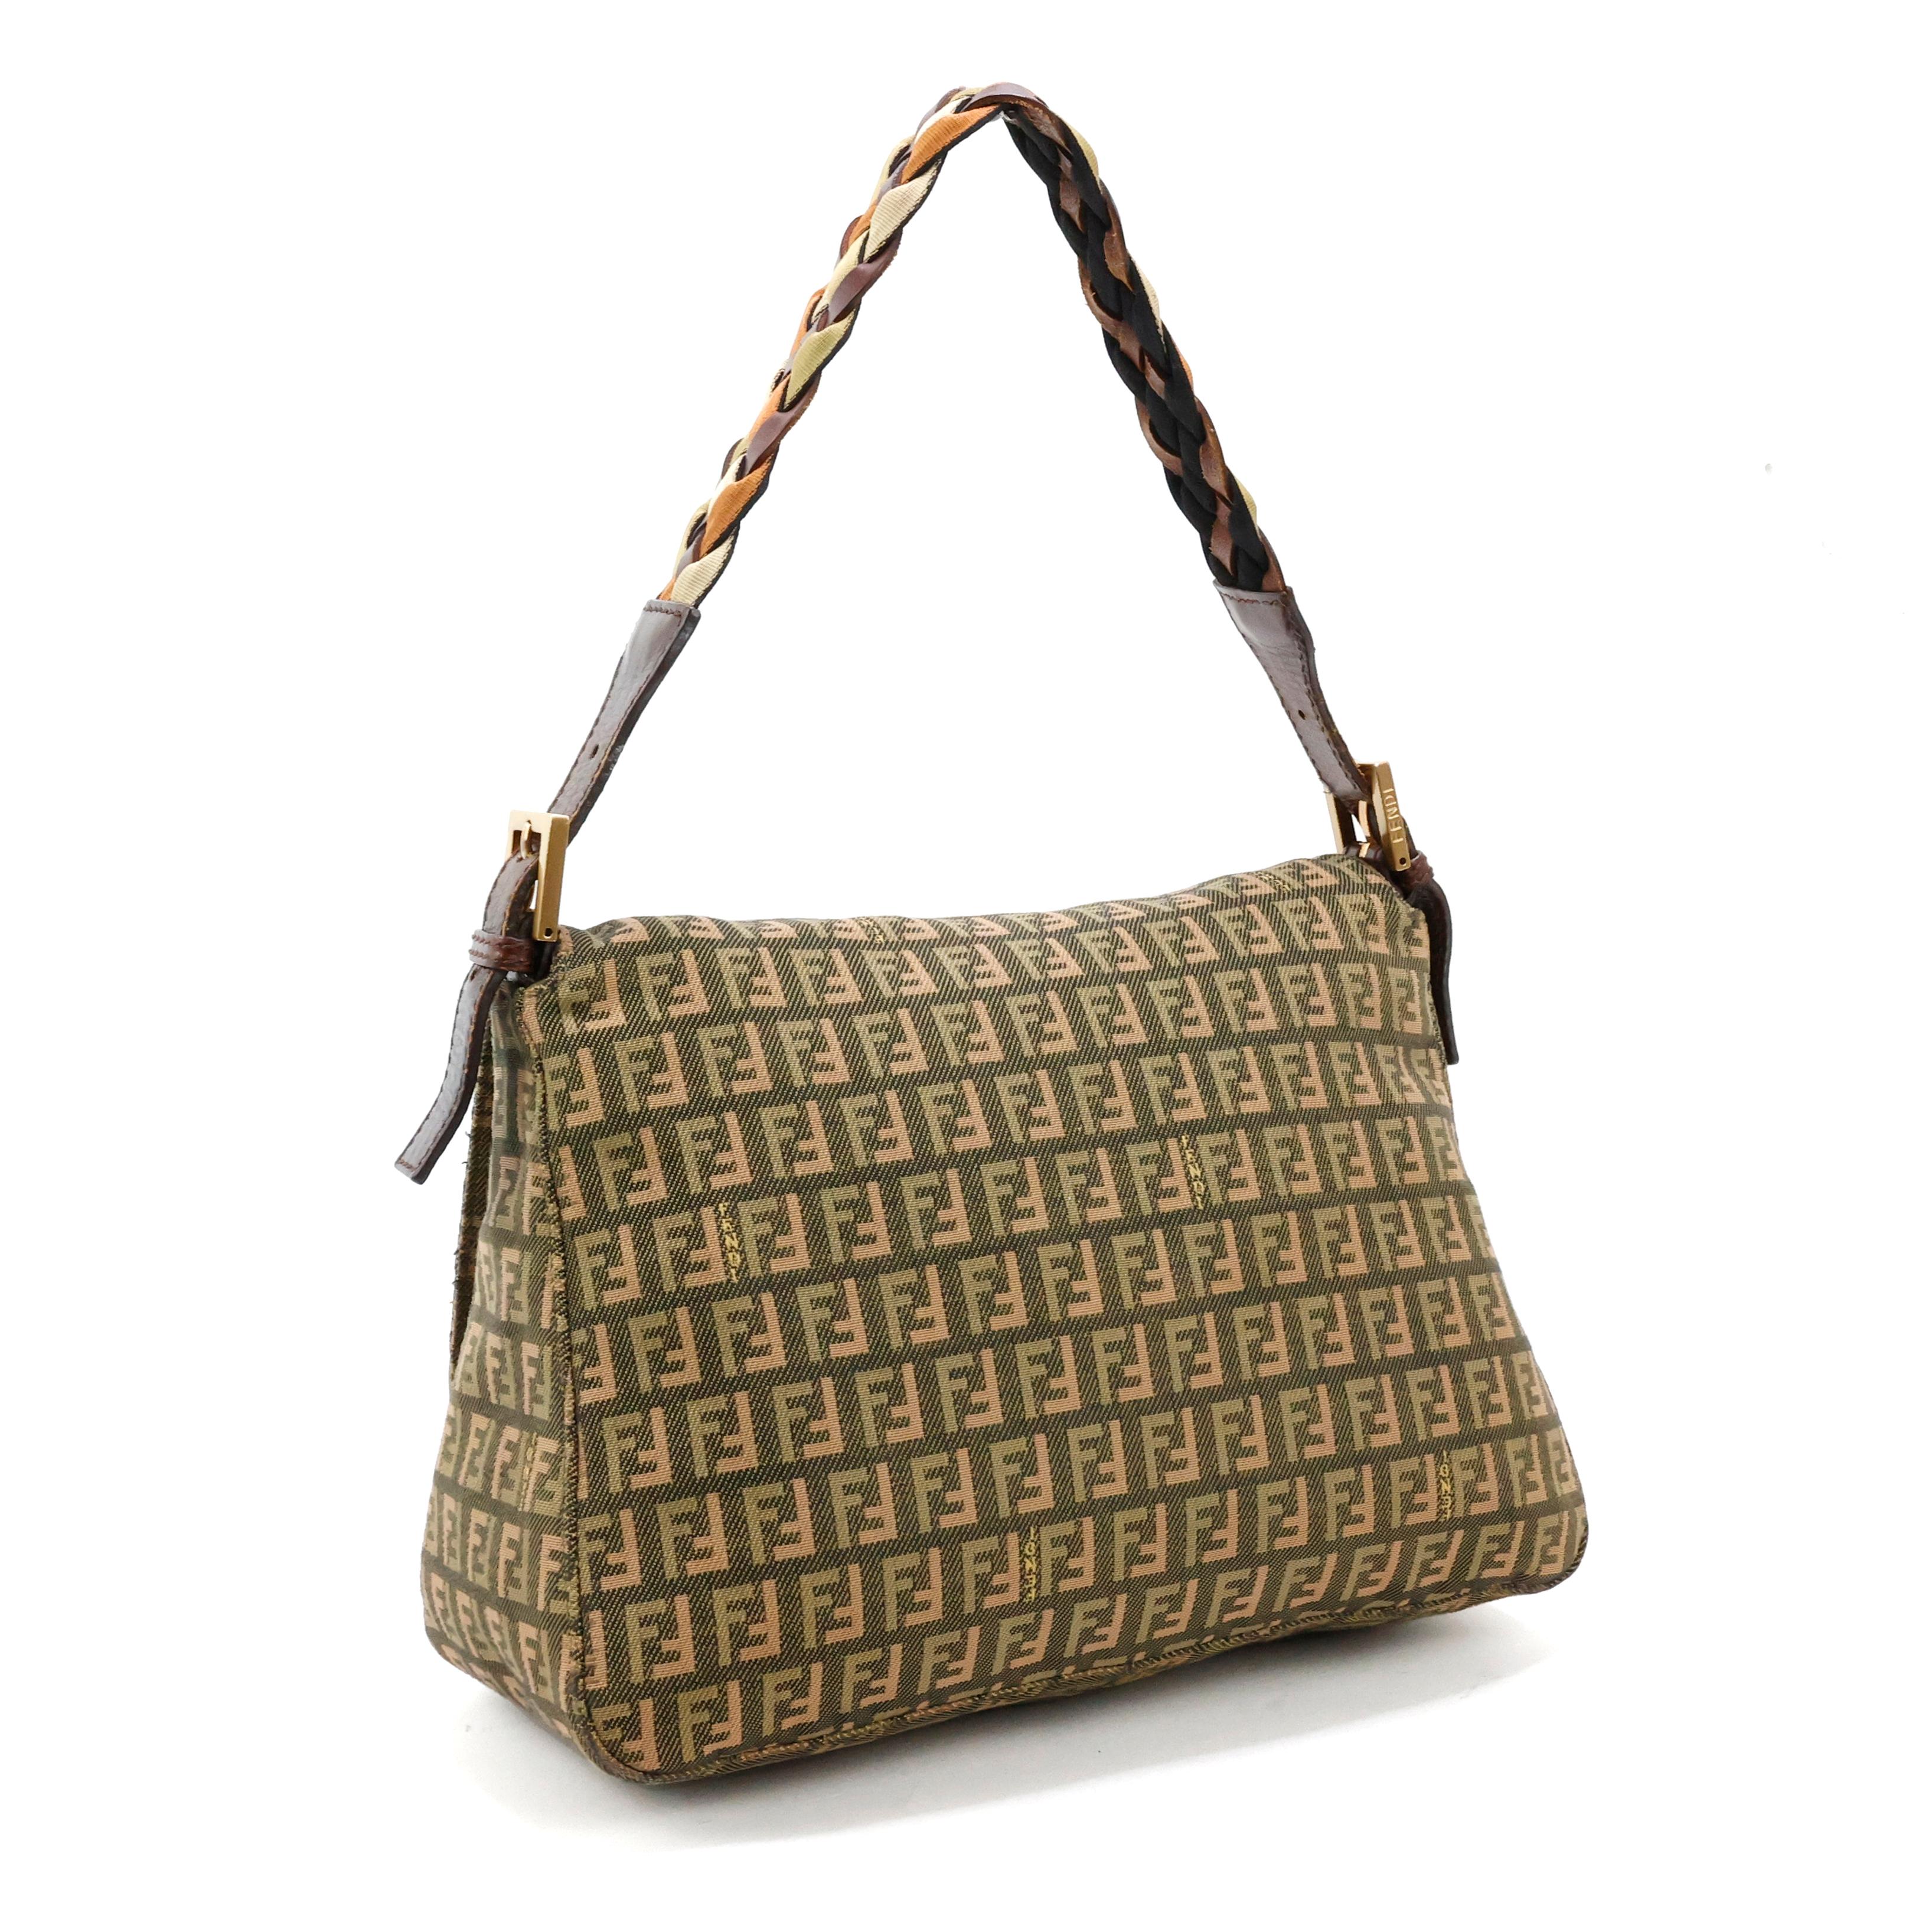 Fendi Mamma baguette in zucchini green monogrammed fabric + brown leather, leather and tessuto intrecciato handle, golden hardware.

Condition:
Very good, minimal signs of wear ex. : Light scratches on hardware and